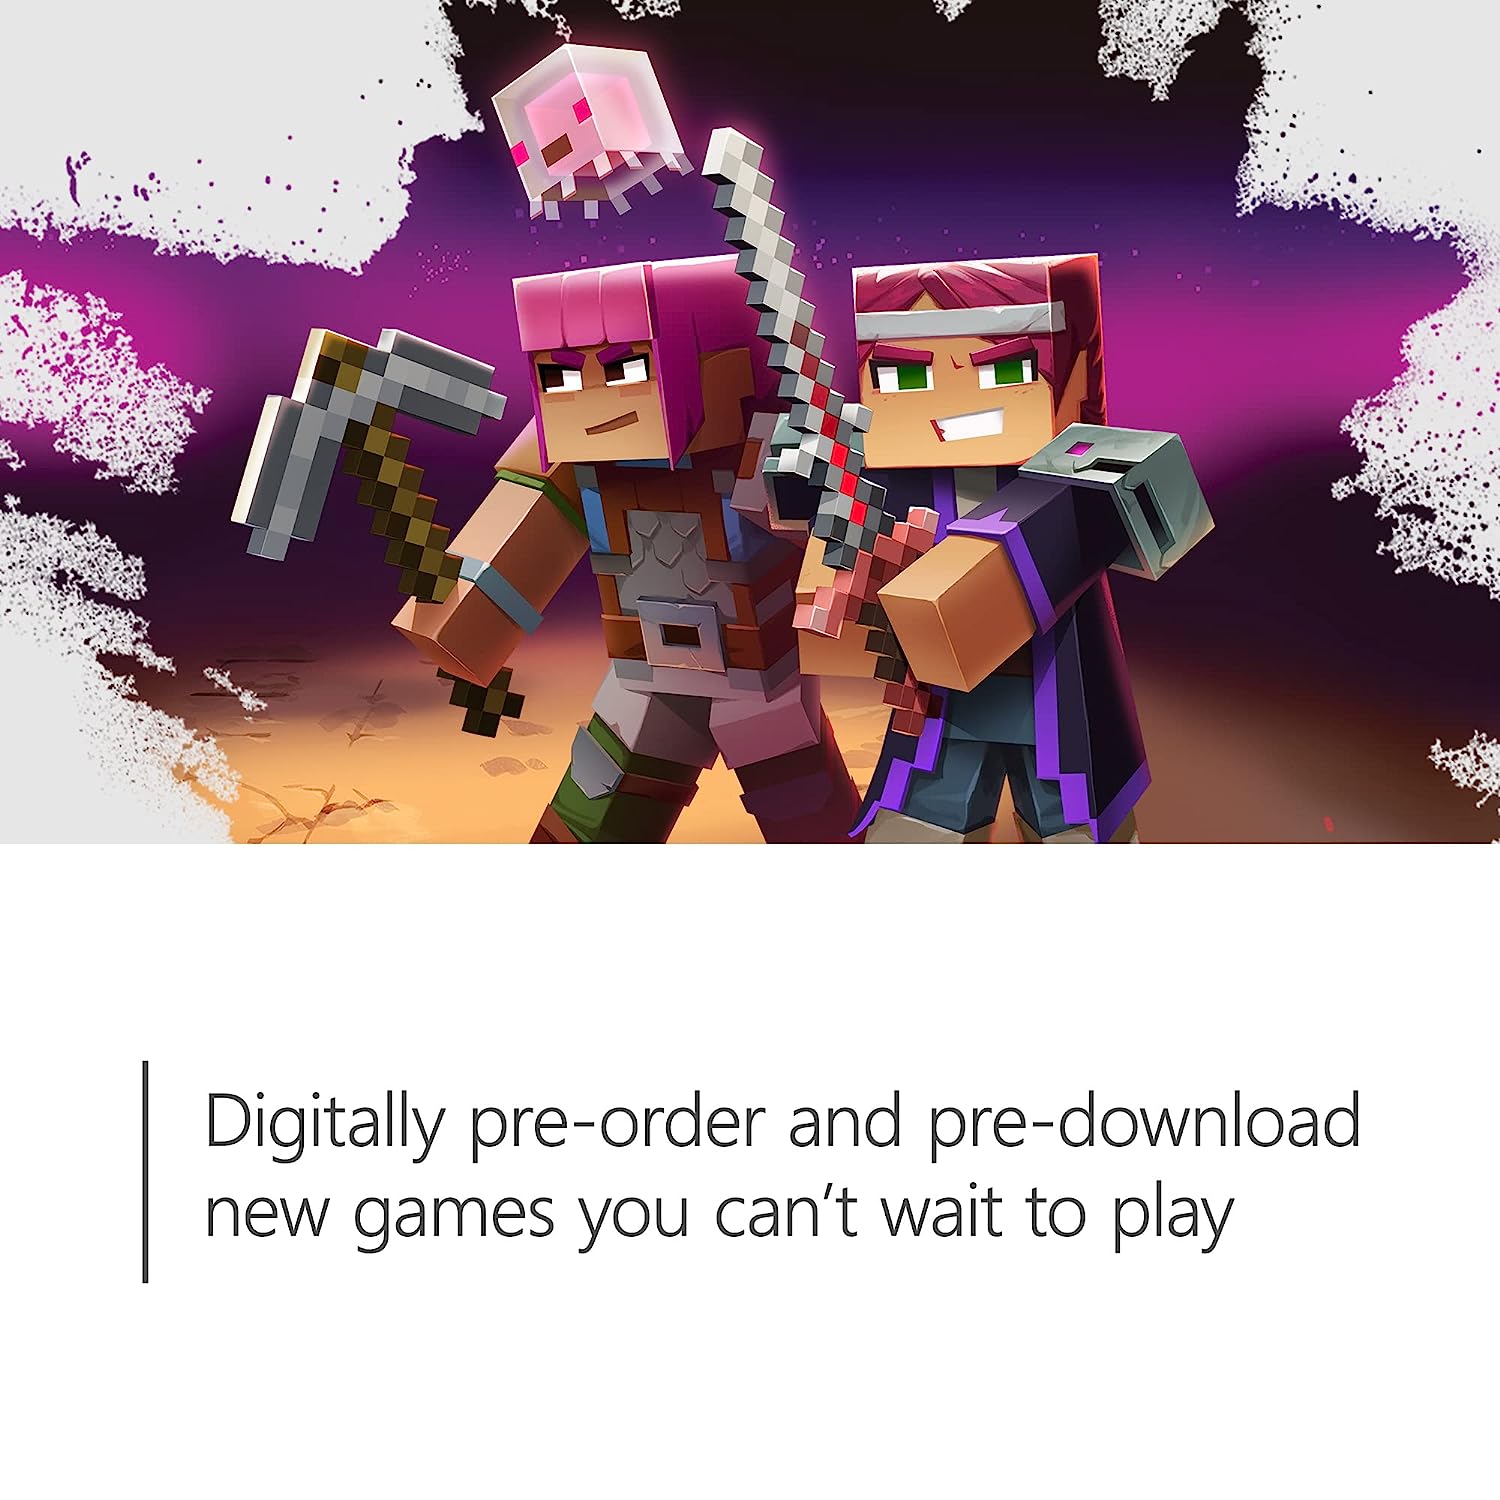 $10 Xbox Digital Gift Card | Digitally pre-order and pre-download new games you can't wait to play.